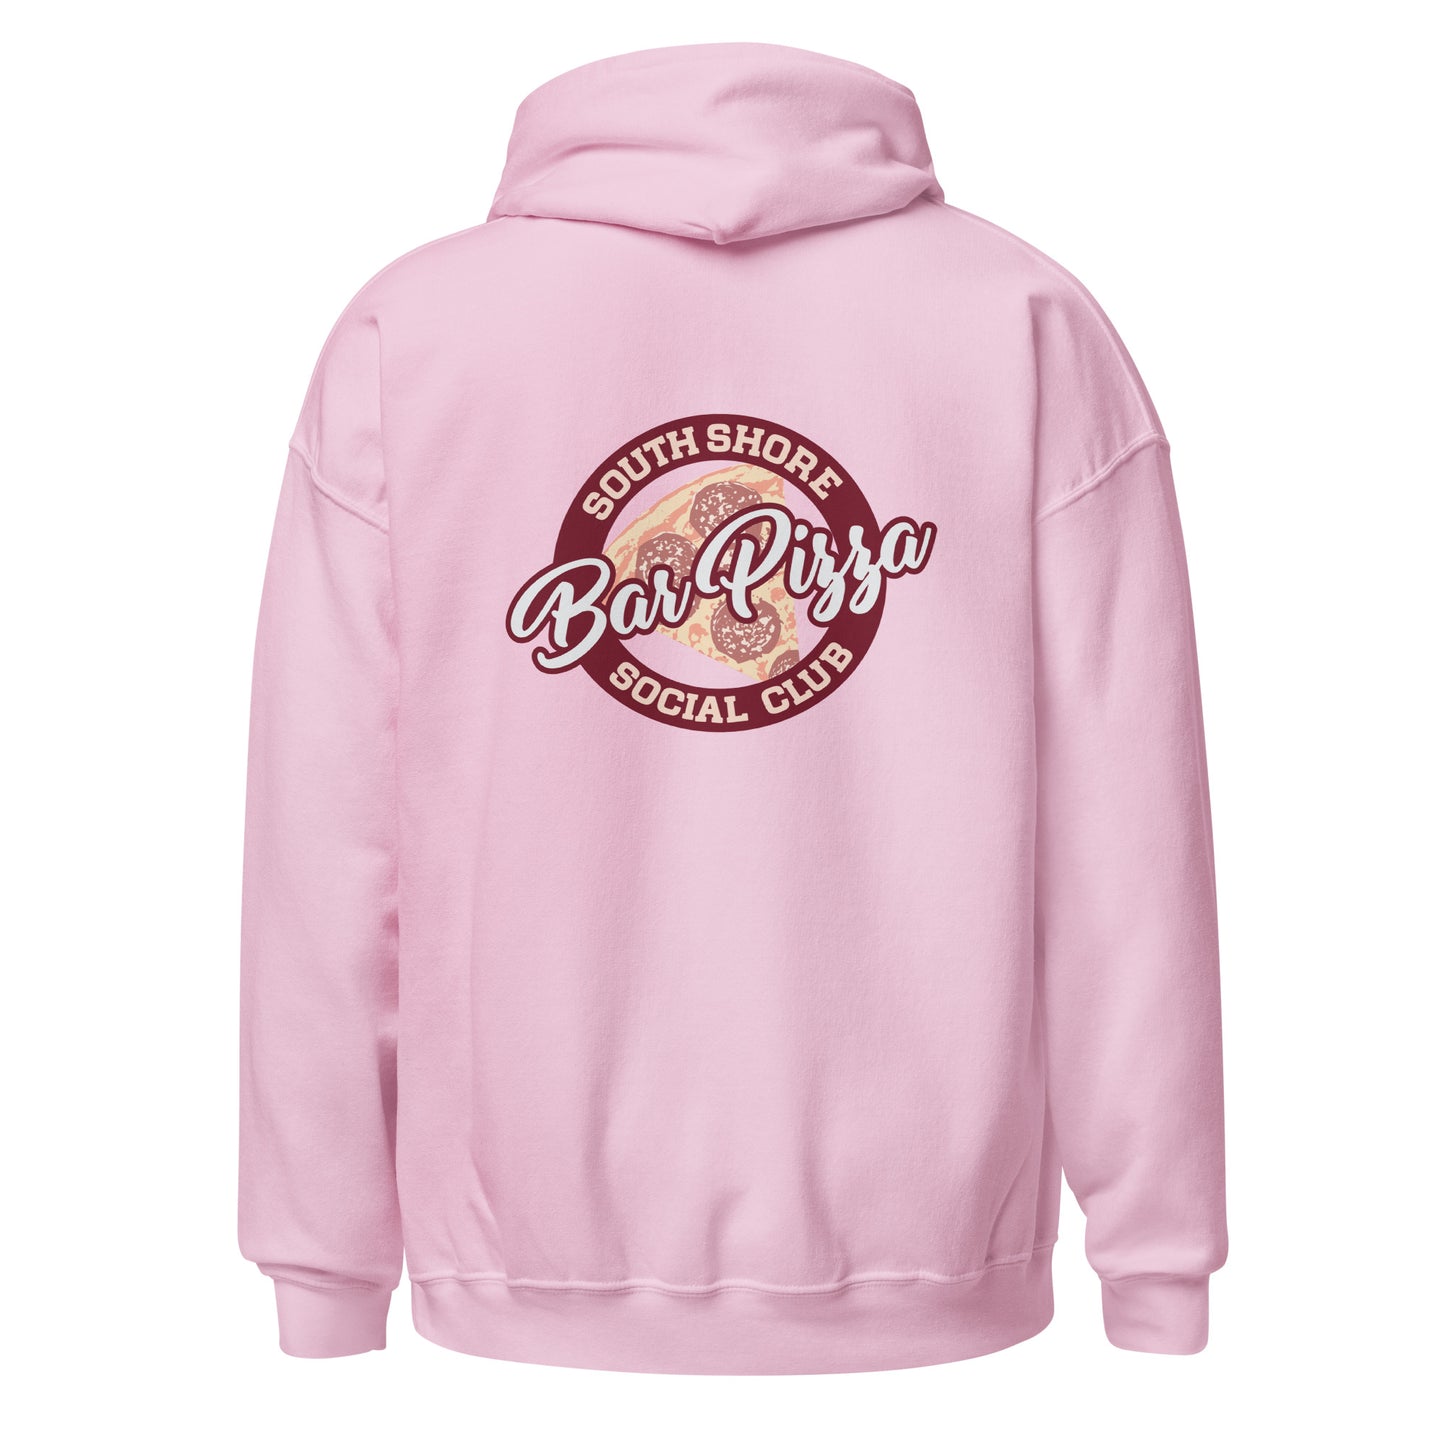 South South Bar Pizza Social Club Hoodie - State Logo Front - SSBPSC Logo on Back